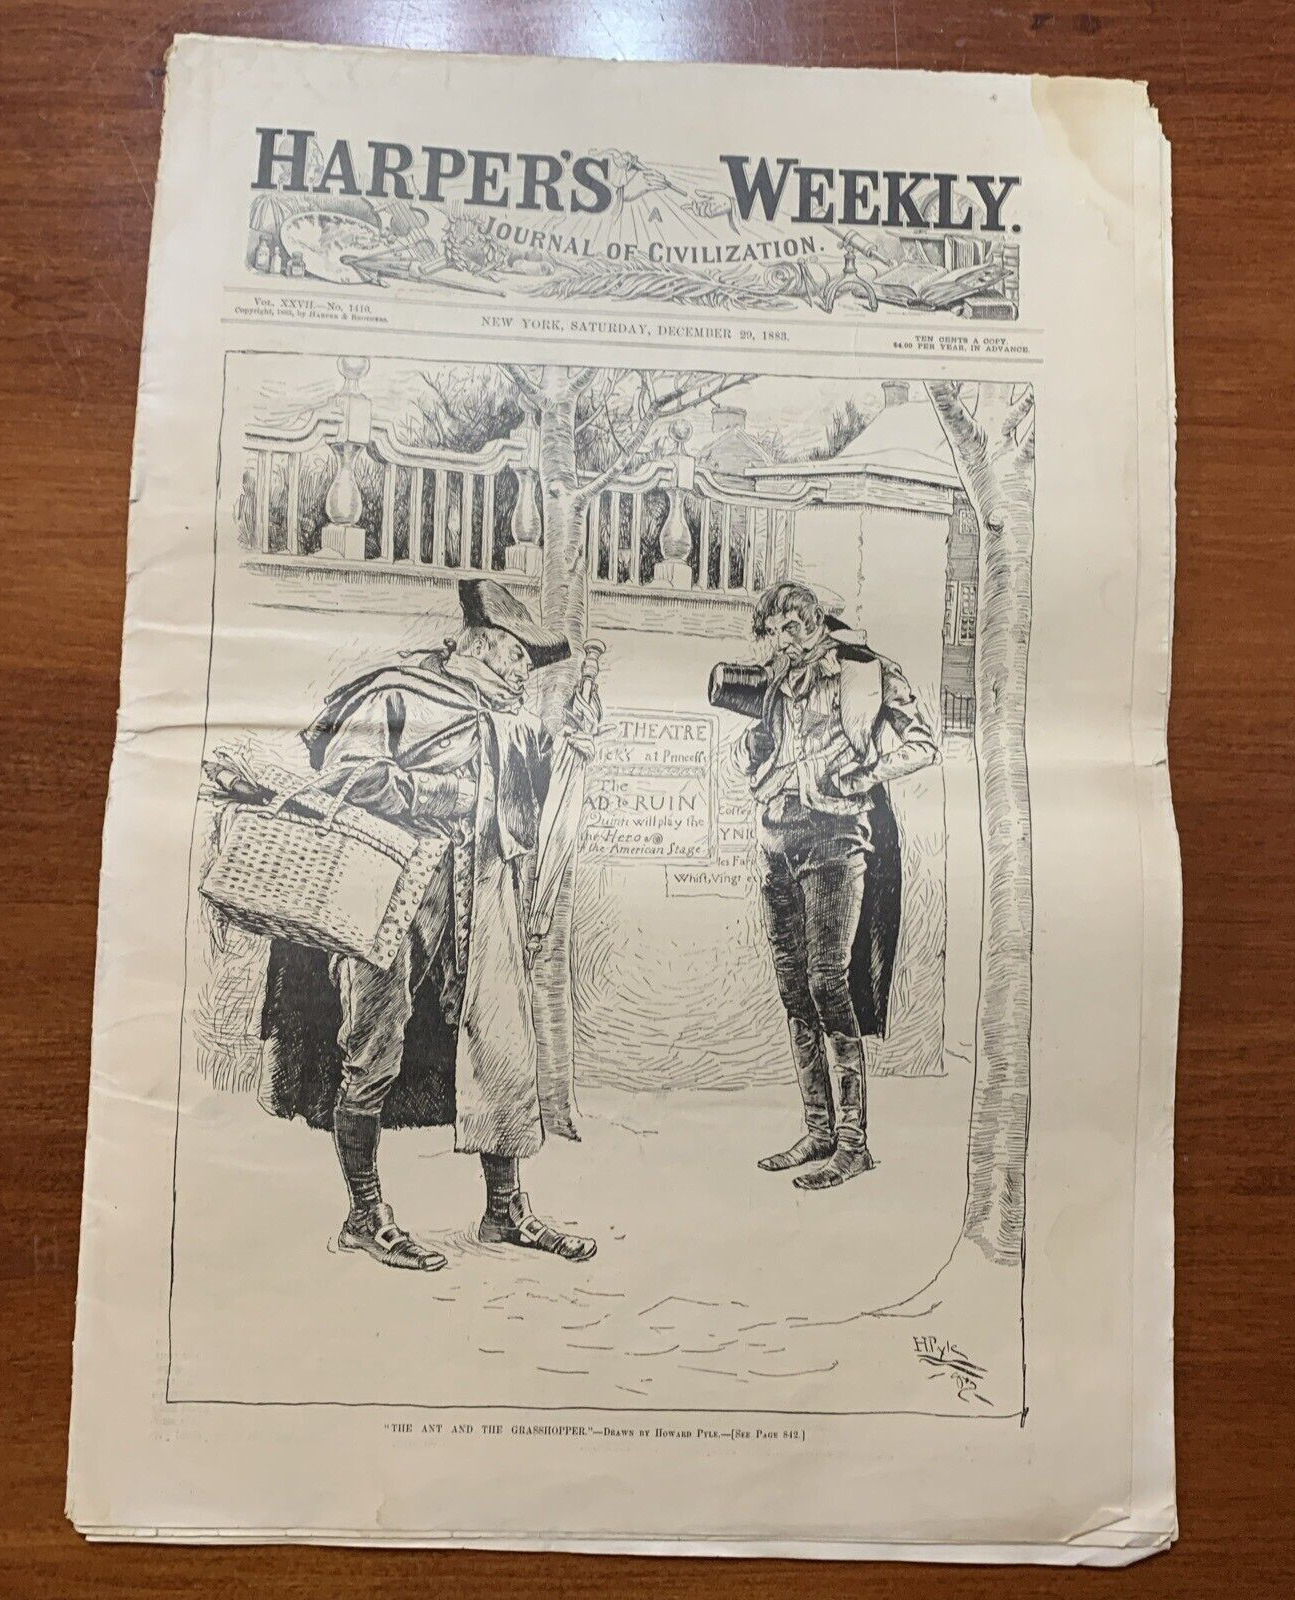 Harper\'s Weekly Dec. 29, 1883  Cover by H.Plye/Centerfold  A.B. Frost + [11-10